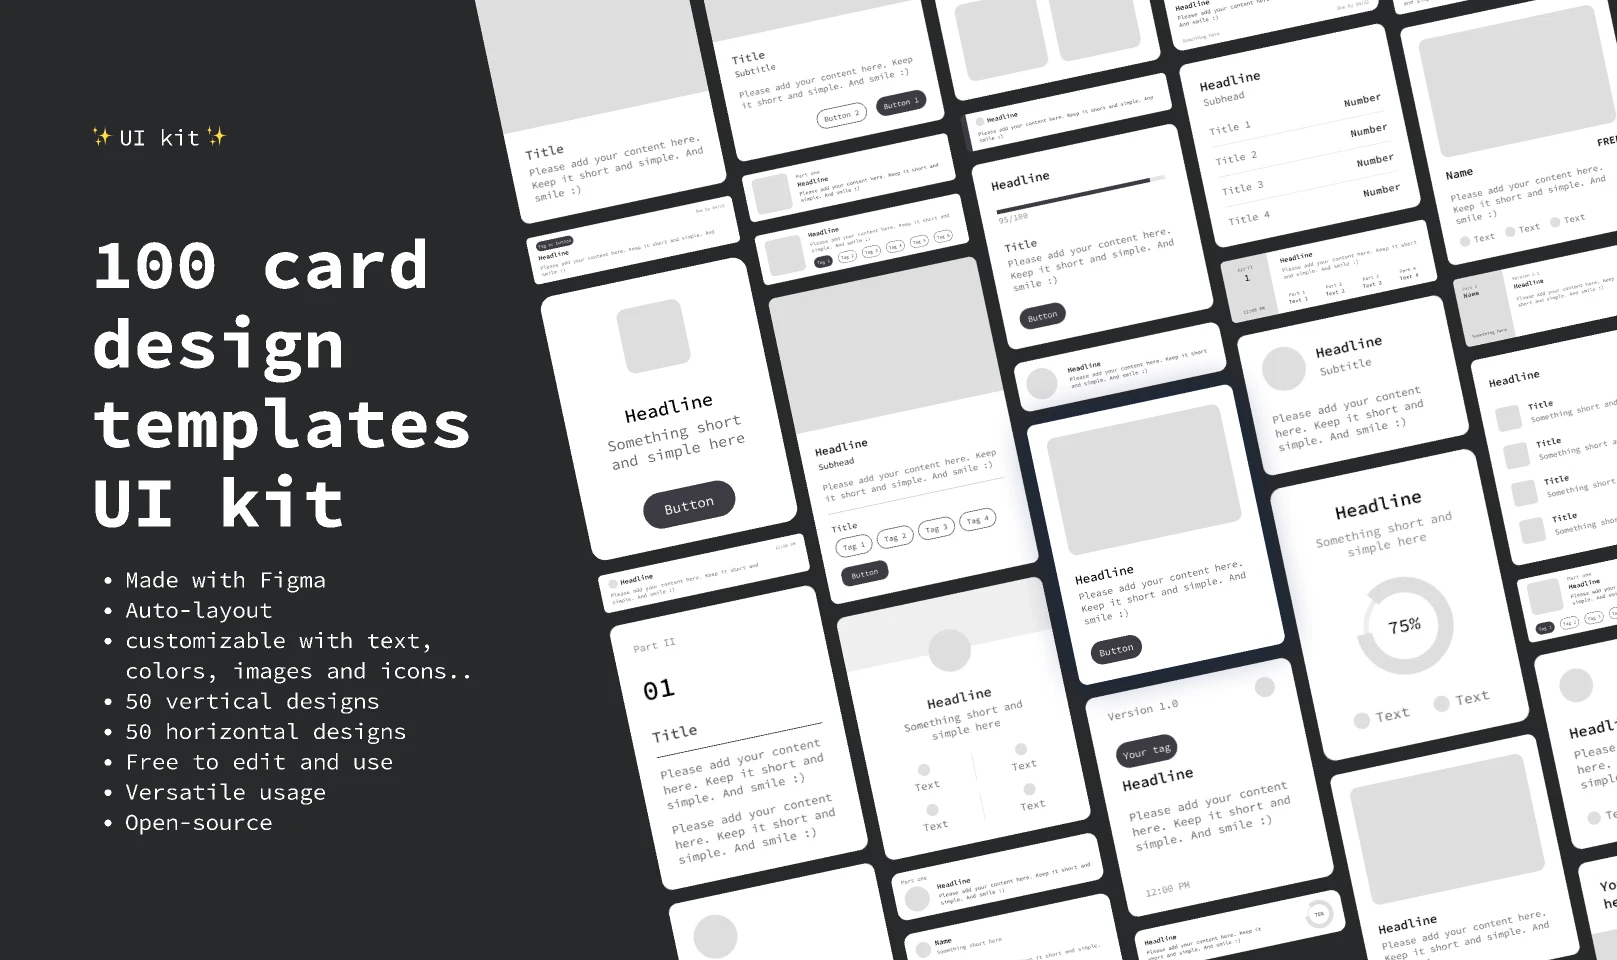 100 card design templates UI kit for Figma and Adobe XD